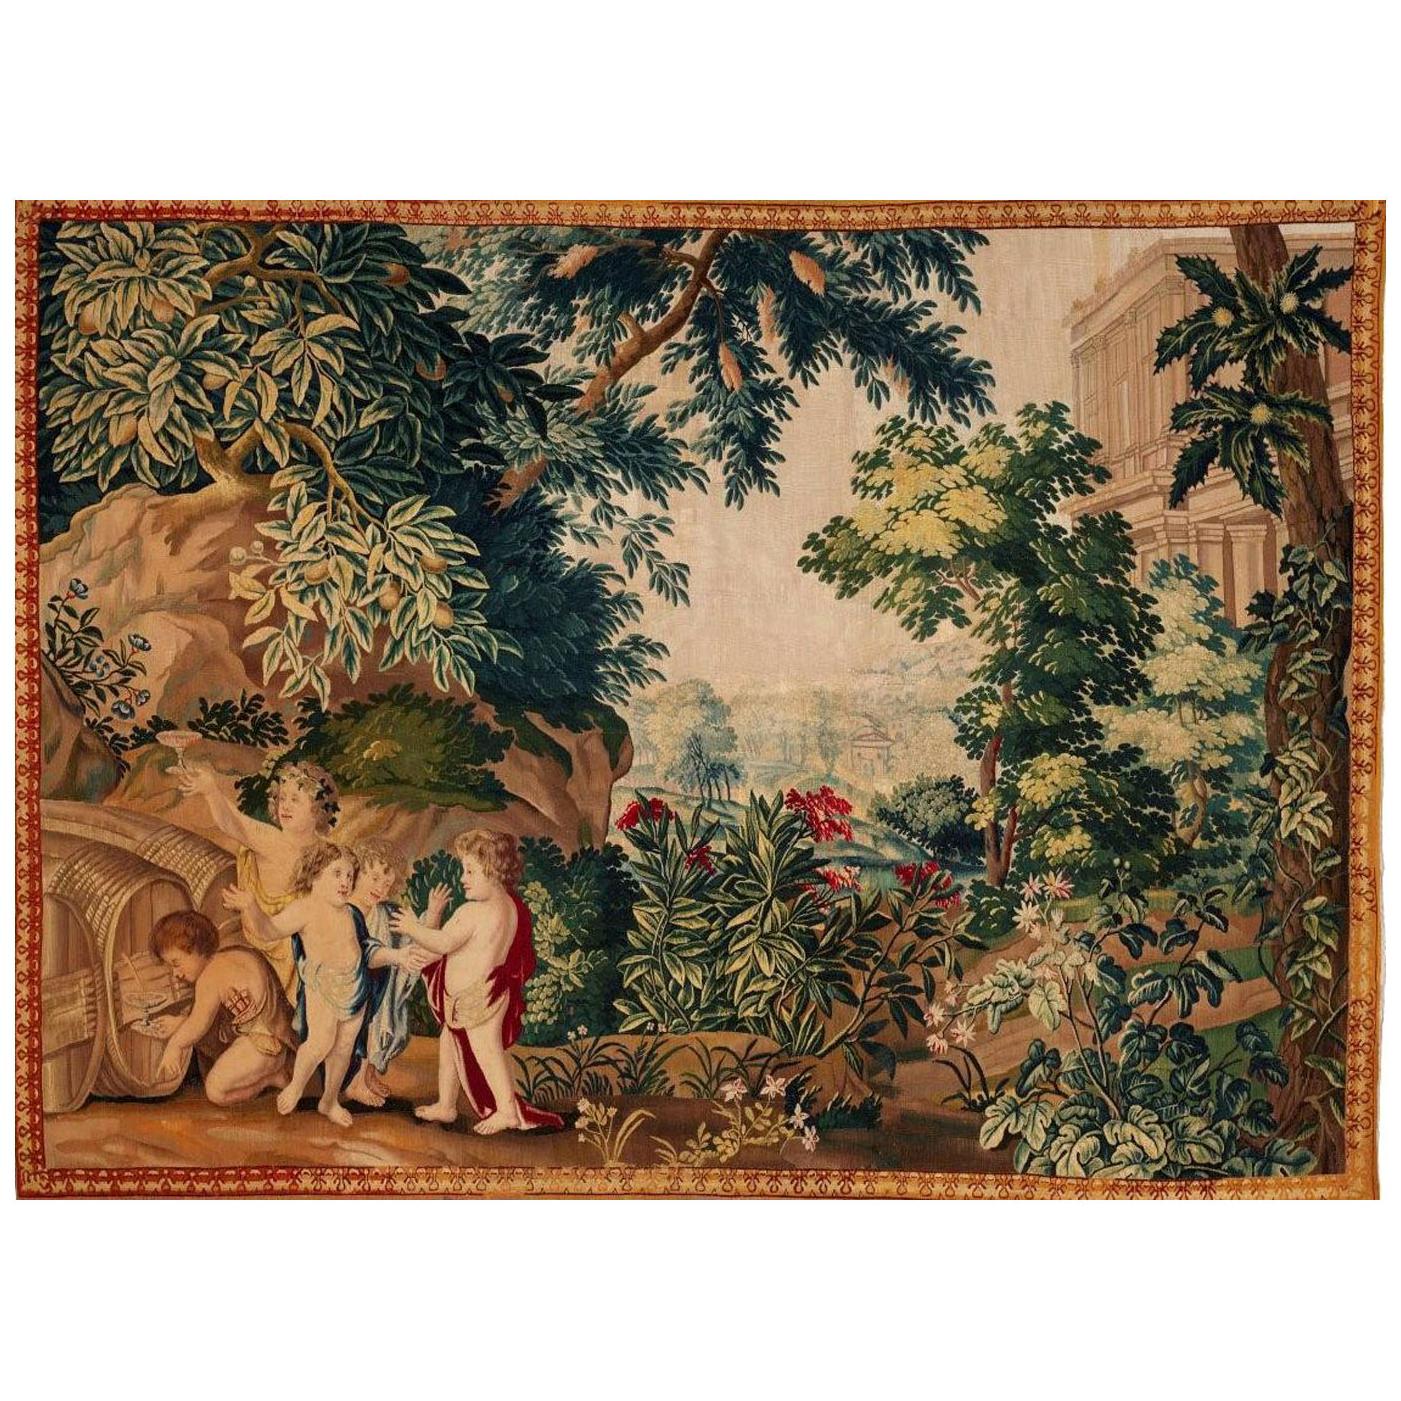 Brussels 18th Century Bacchanale Tapestry, circa 1760 10'6 x 7'4